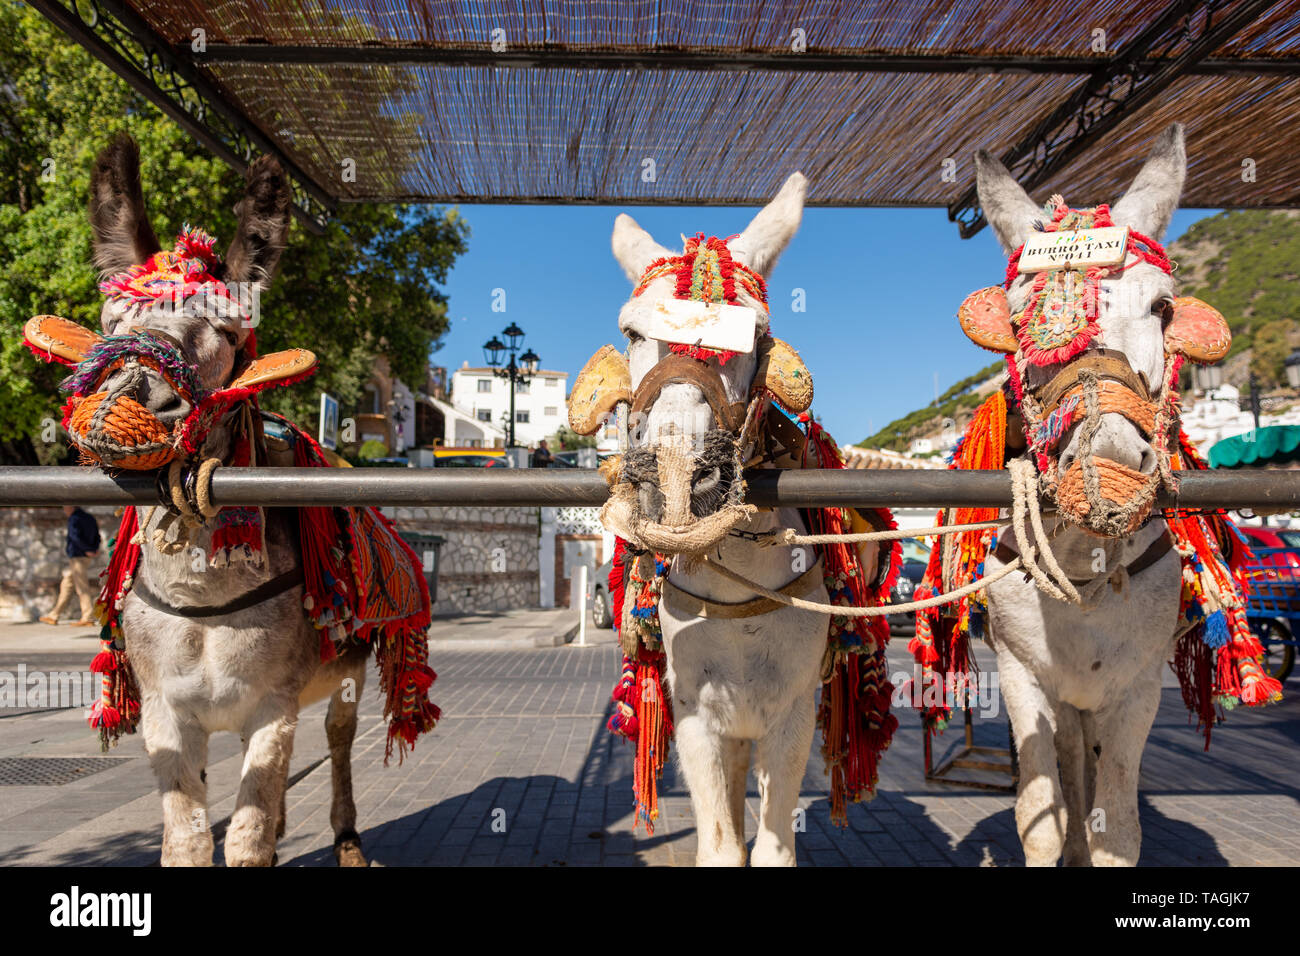 Working donkeys tied up waiting to take tourists on a tour of the picturesque mountain village of Mijas, Andalusia region, Spain Stock Photo